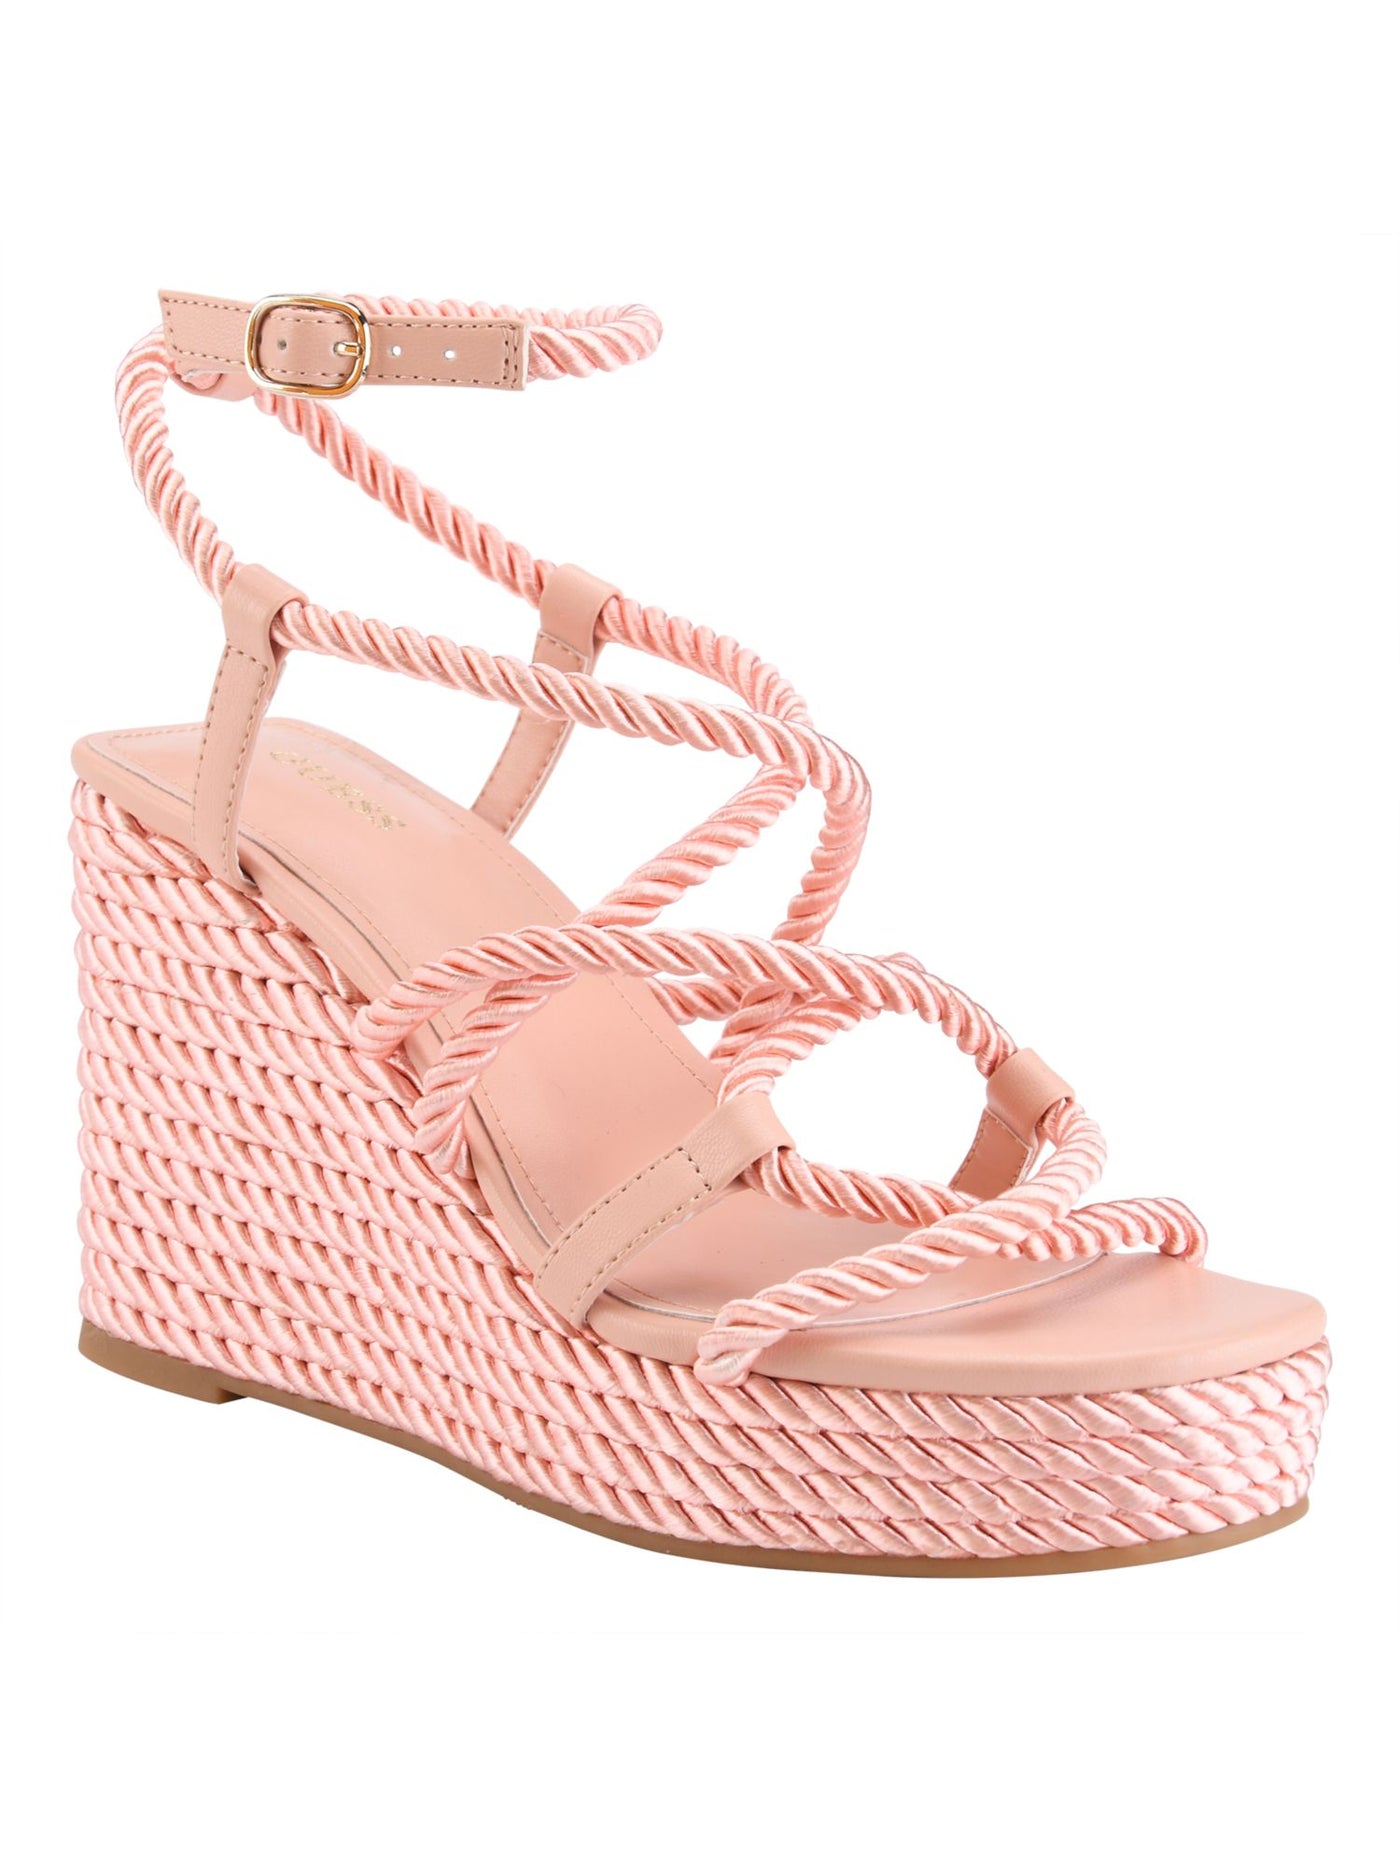 GUESS Womens Pink Textured Rope Wrapped 1" Platform Padded Adjustable Ankle Strap Natesha Round Toe Wedge Buckle Heeled Sandal 6.5 M